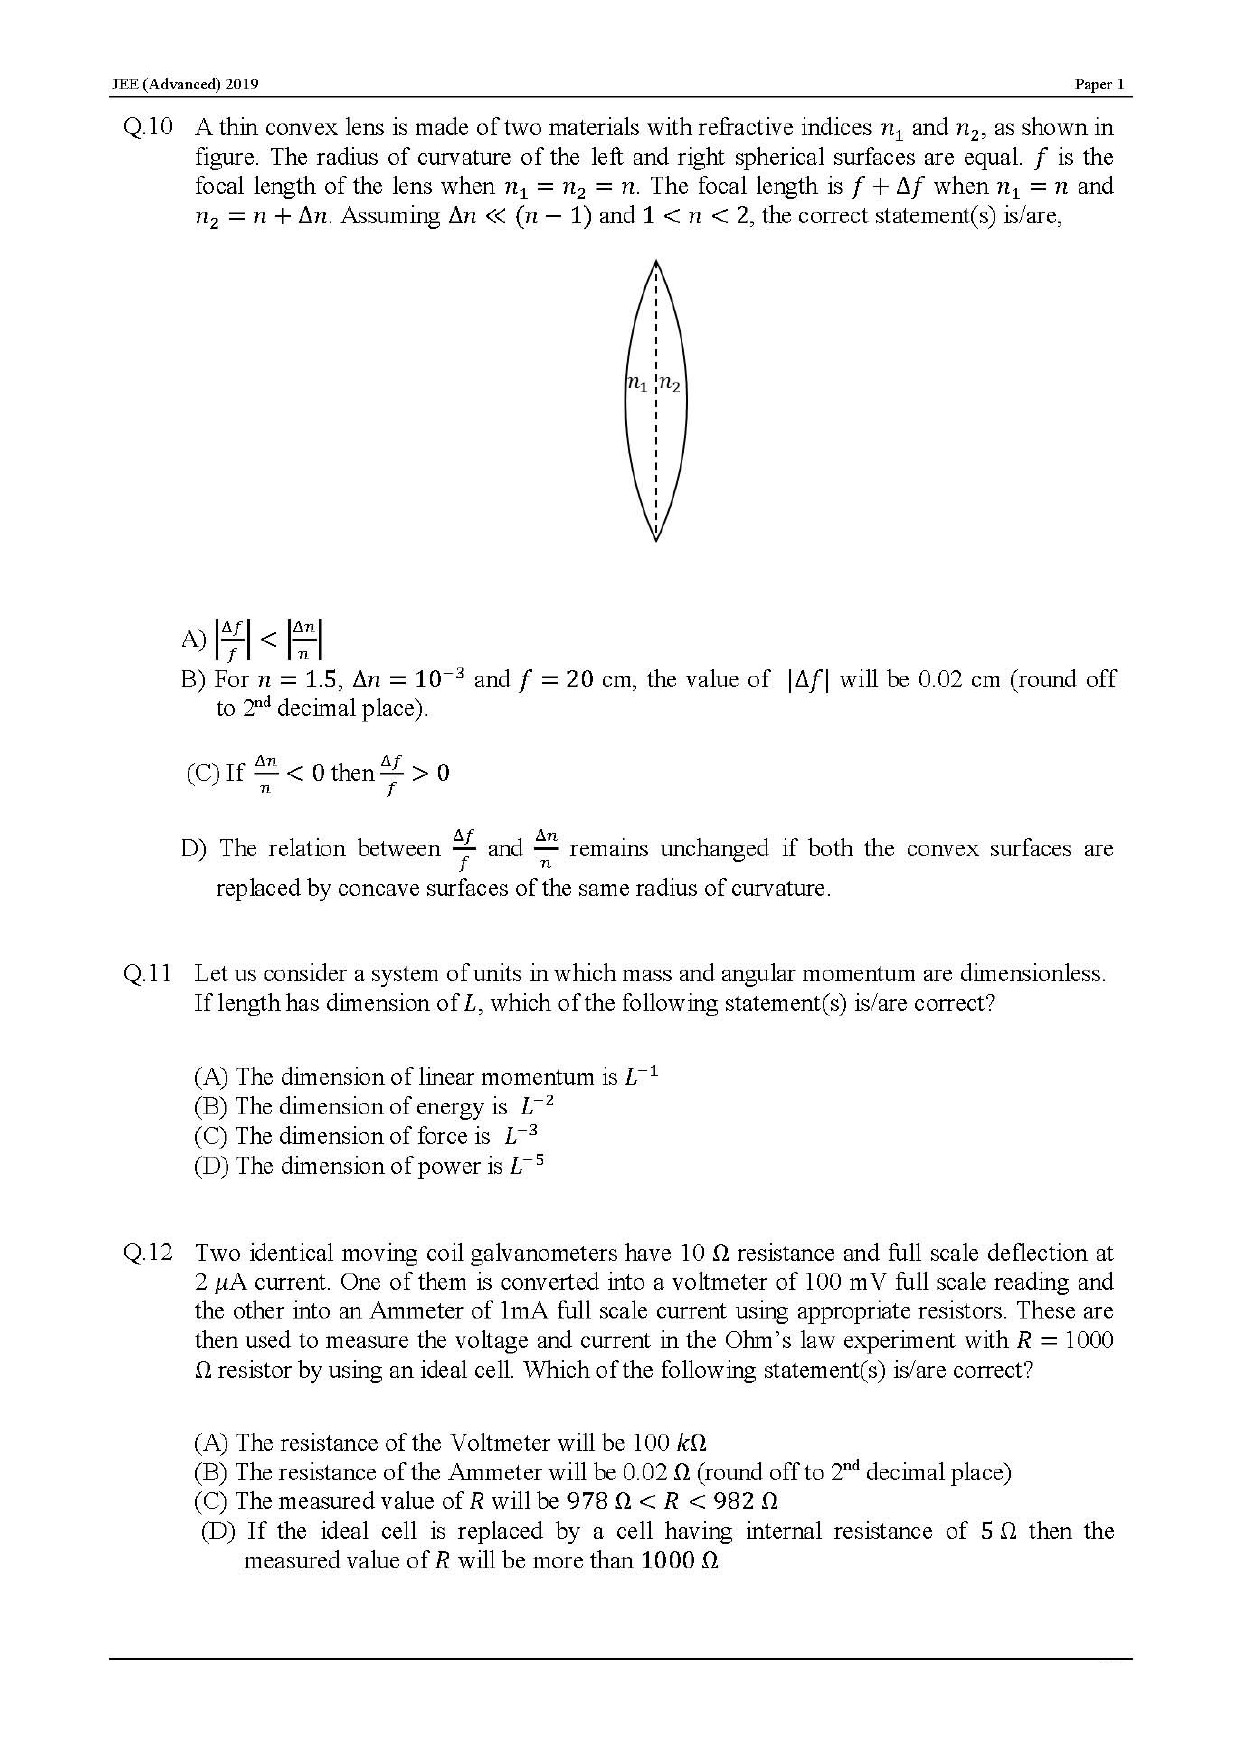 JEE Advanced English Question Paper 2019 Paper 1 Physics 8